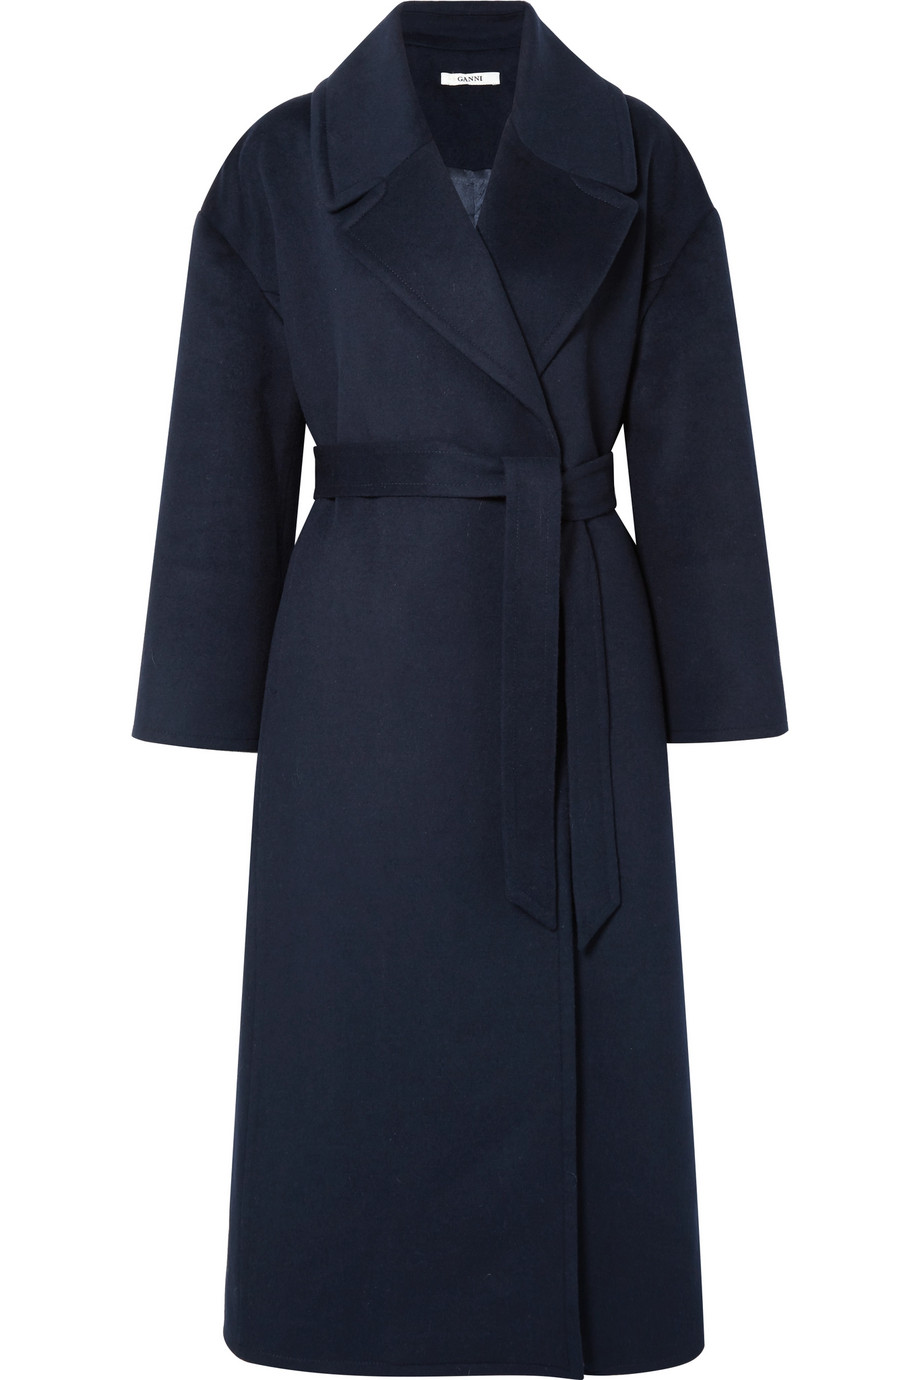 10 Coats That Are Perfect for a Winter Wedding | Who What Wear